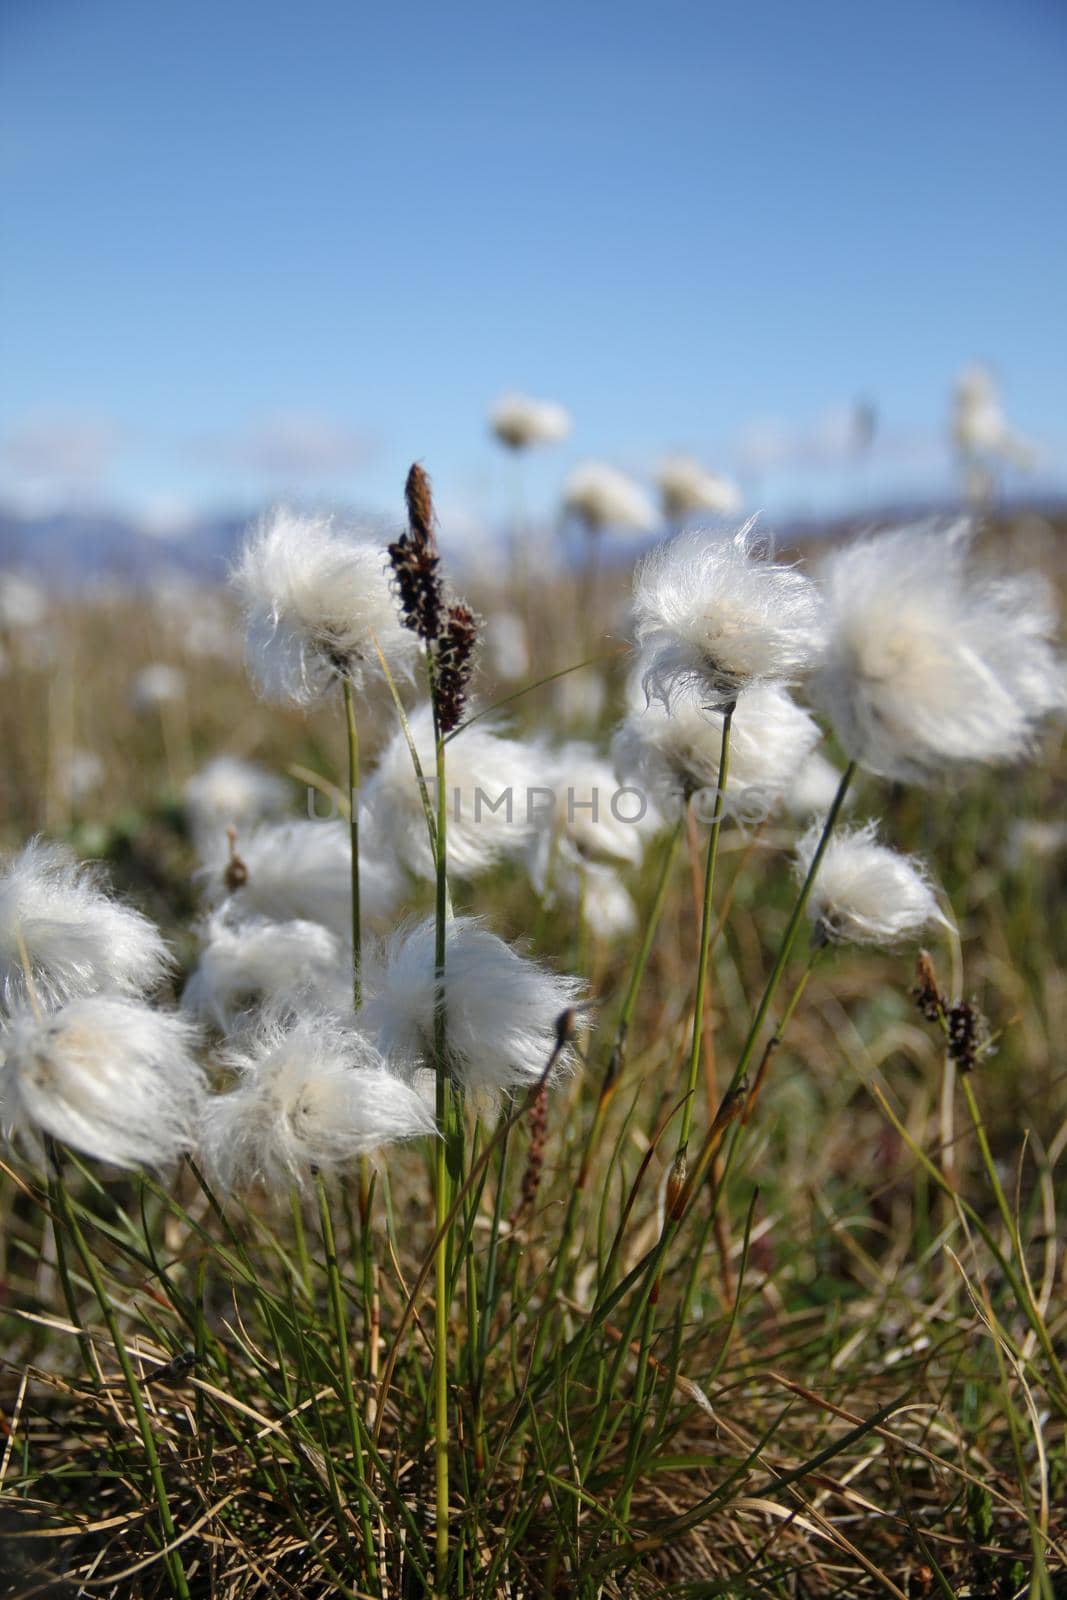 Arctic cotton or arctic cottongrass blowing in the wind, Pond Inlet Nunavut by Granchinho